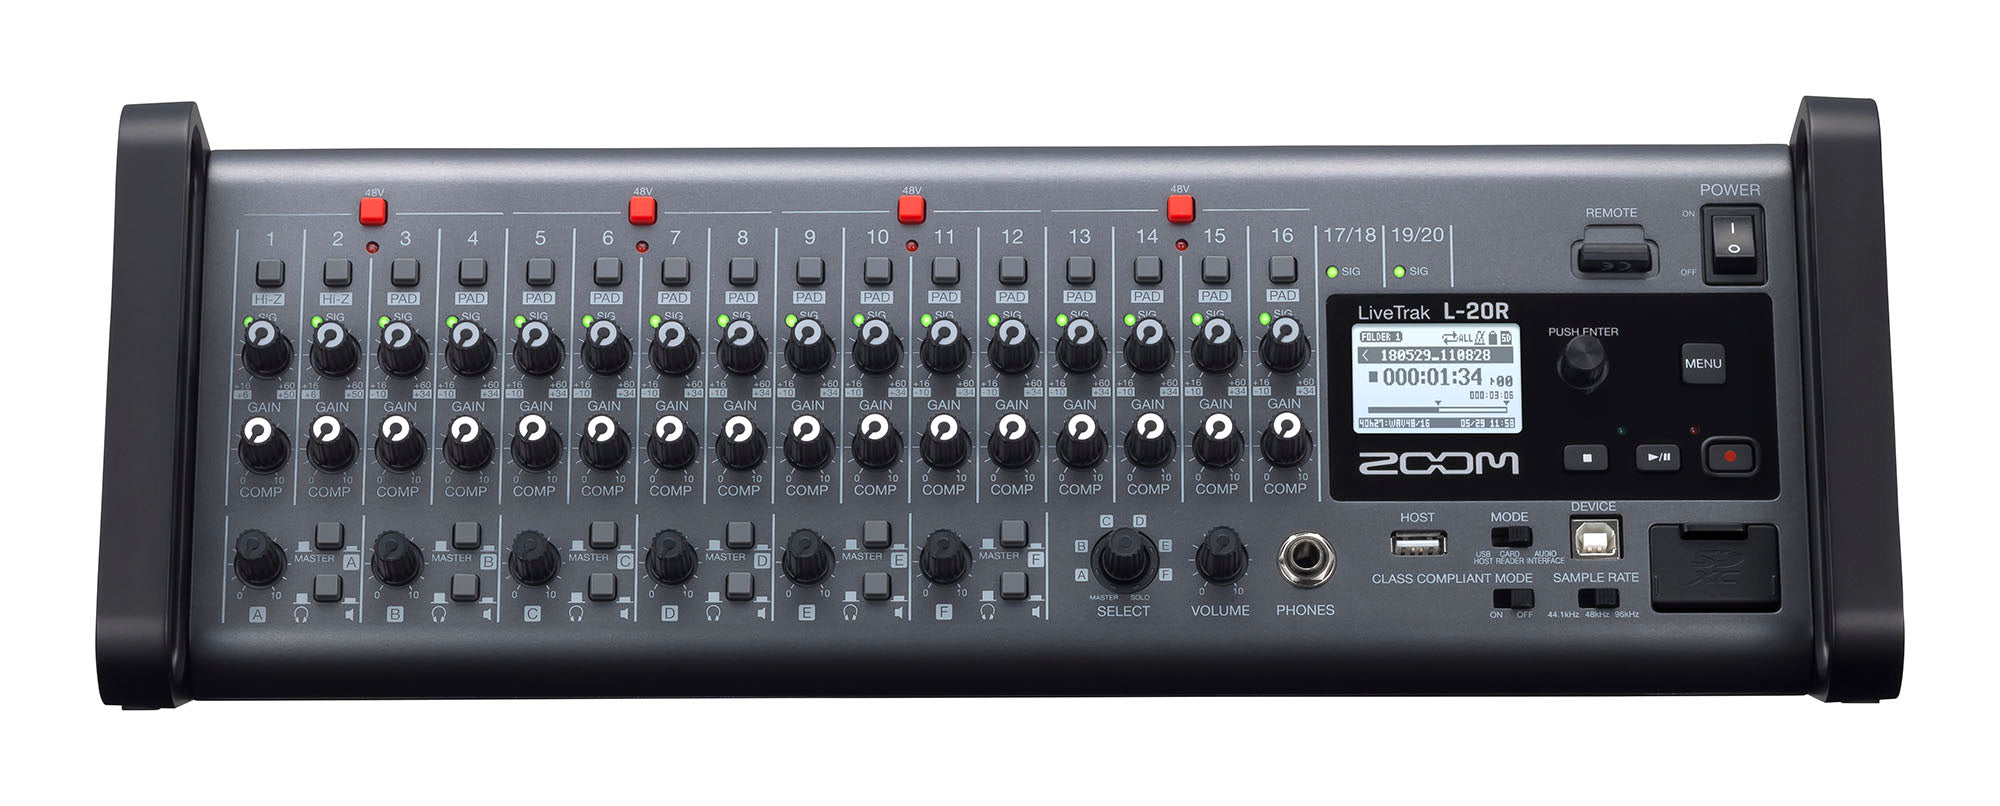 Zoom Live Track L-20R Remote Digital Mixer and Recorder by Zoom